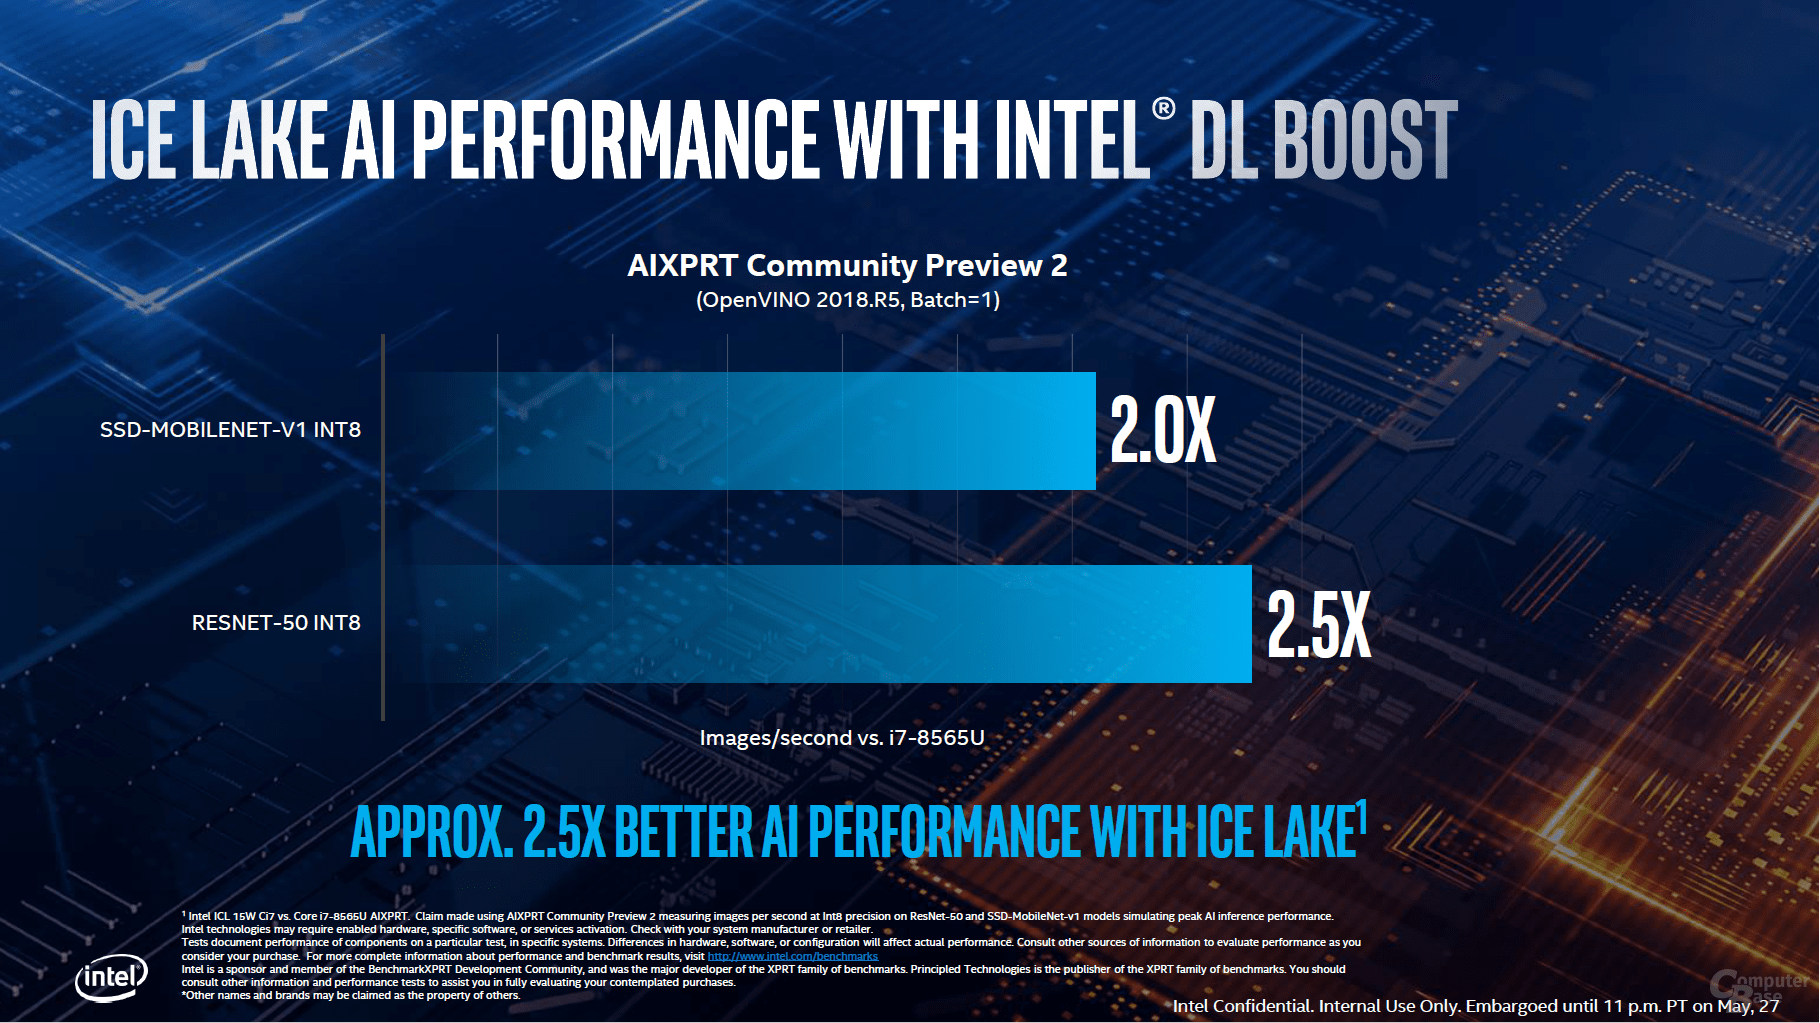 DL Boost offers massive performance gain "class =" border-image